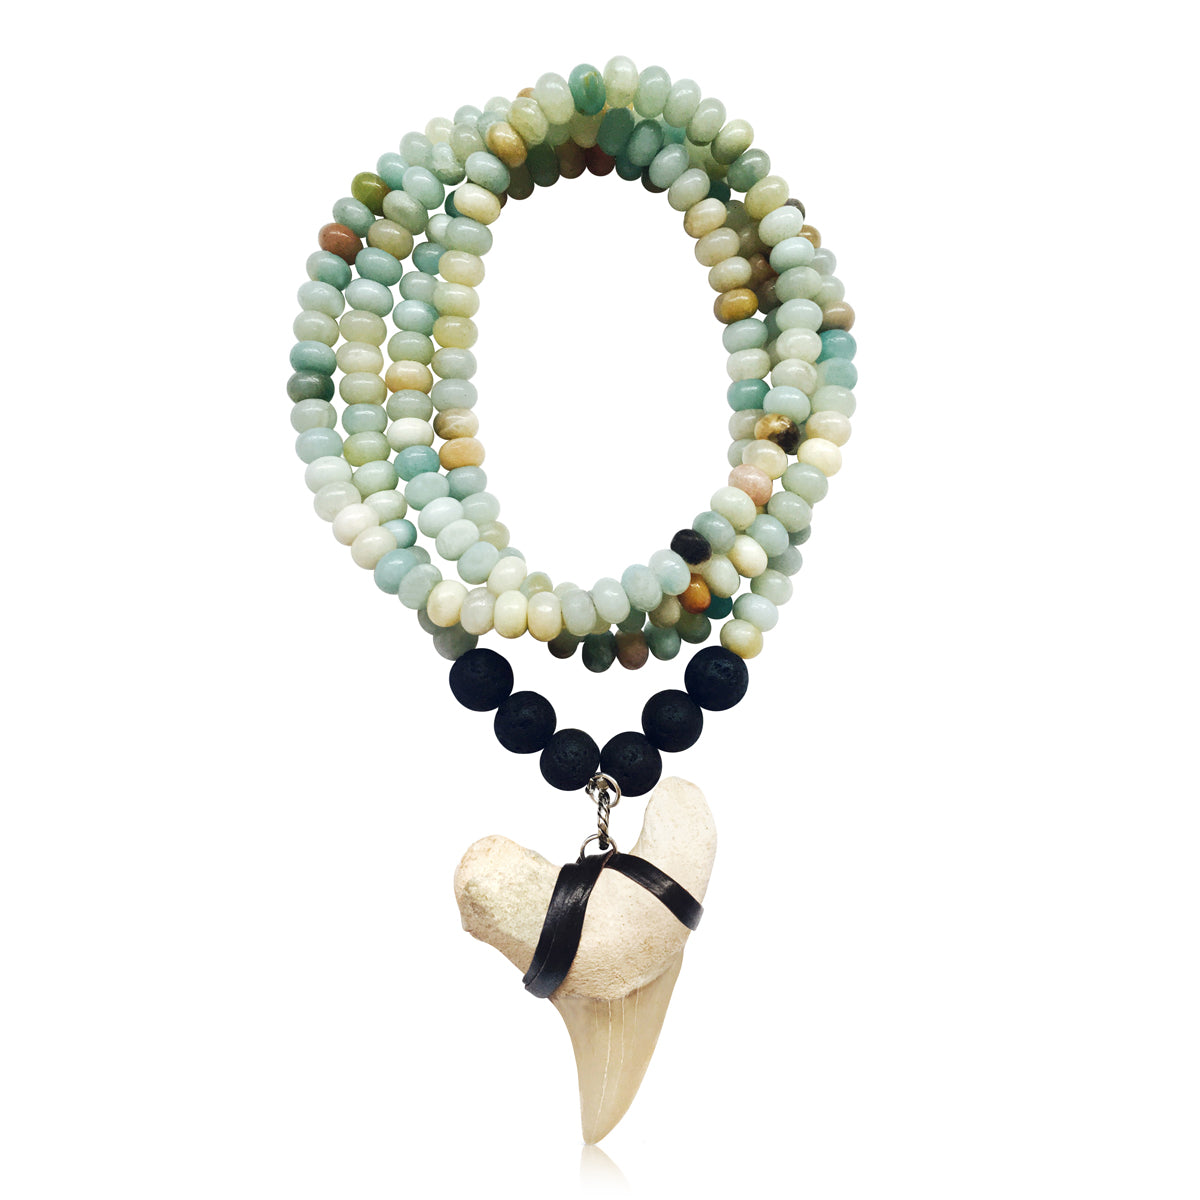 Shark Tooth Necklace for the Adrenaline Hunters and Shark Lovers - Amazonite and Lava